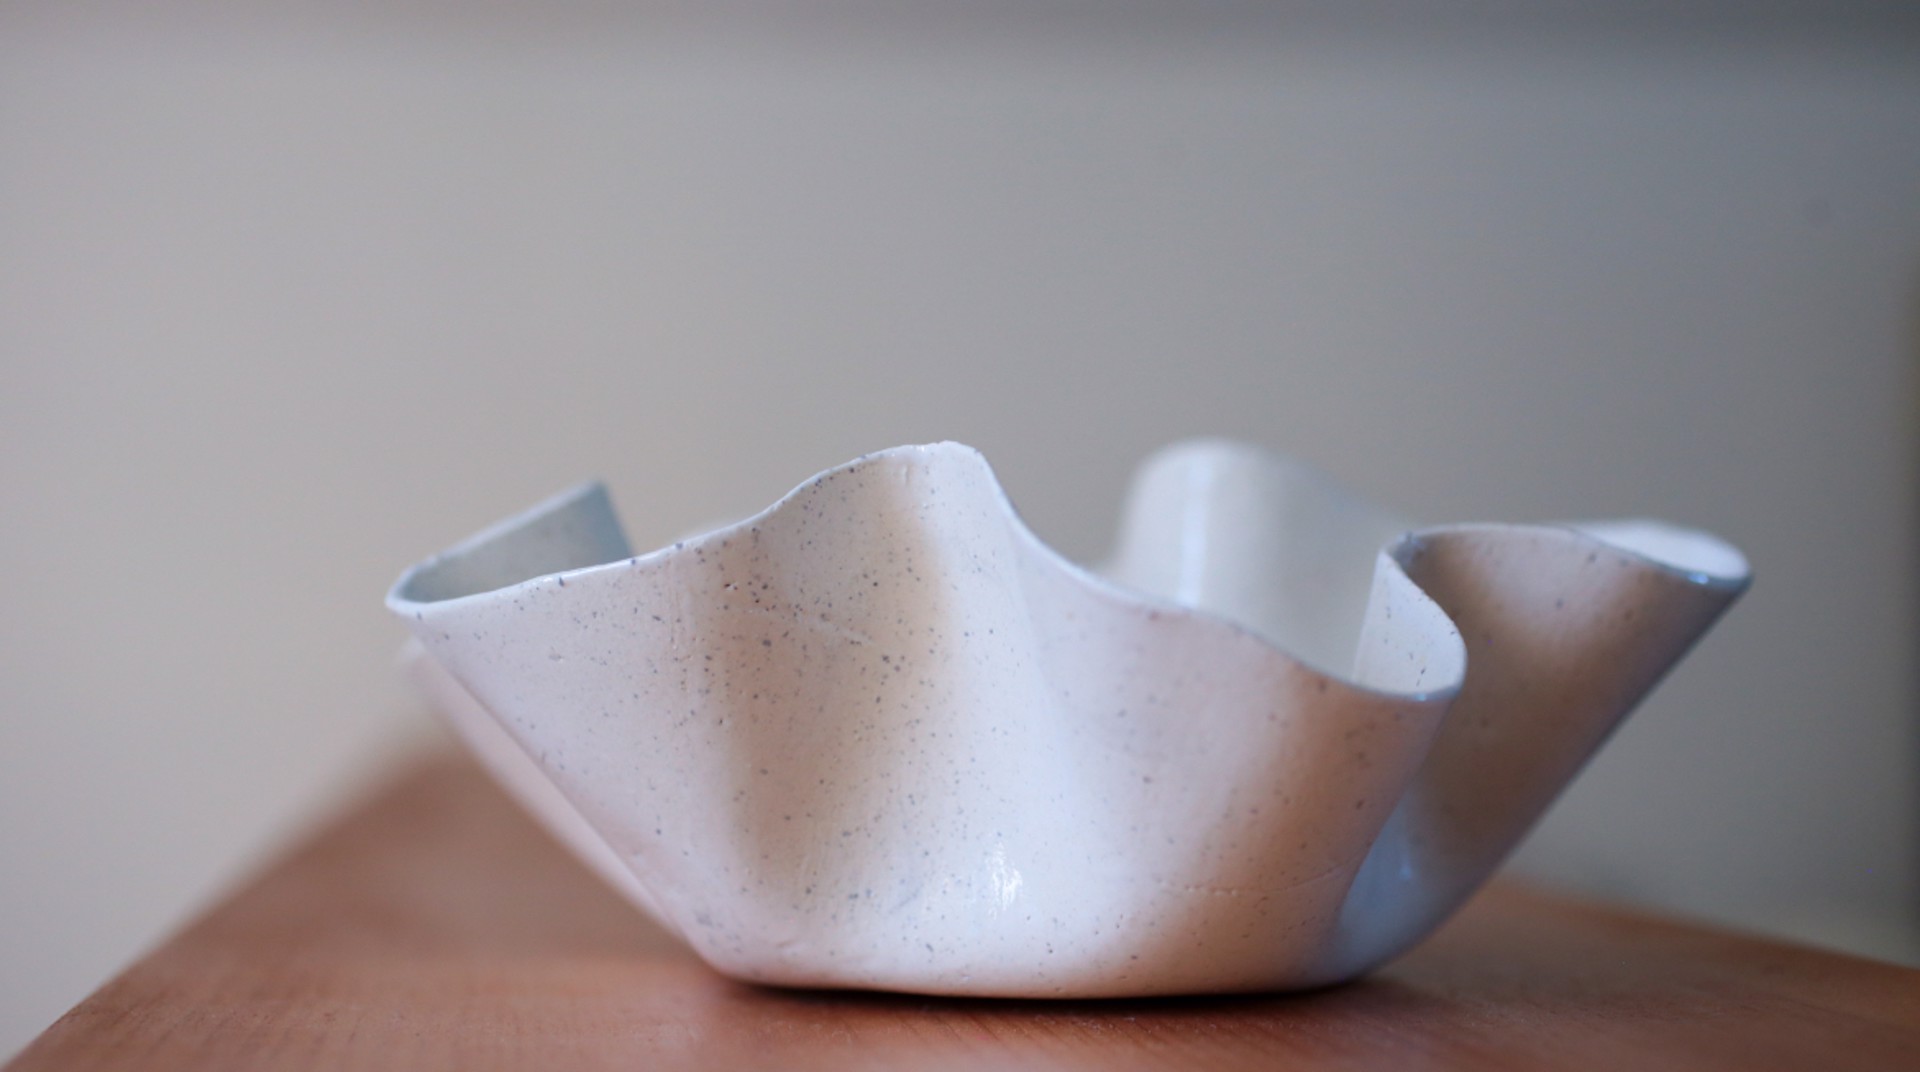 Speckled Vessel by Libbie Rothschild